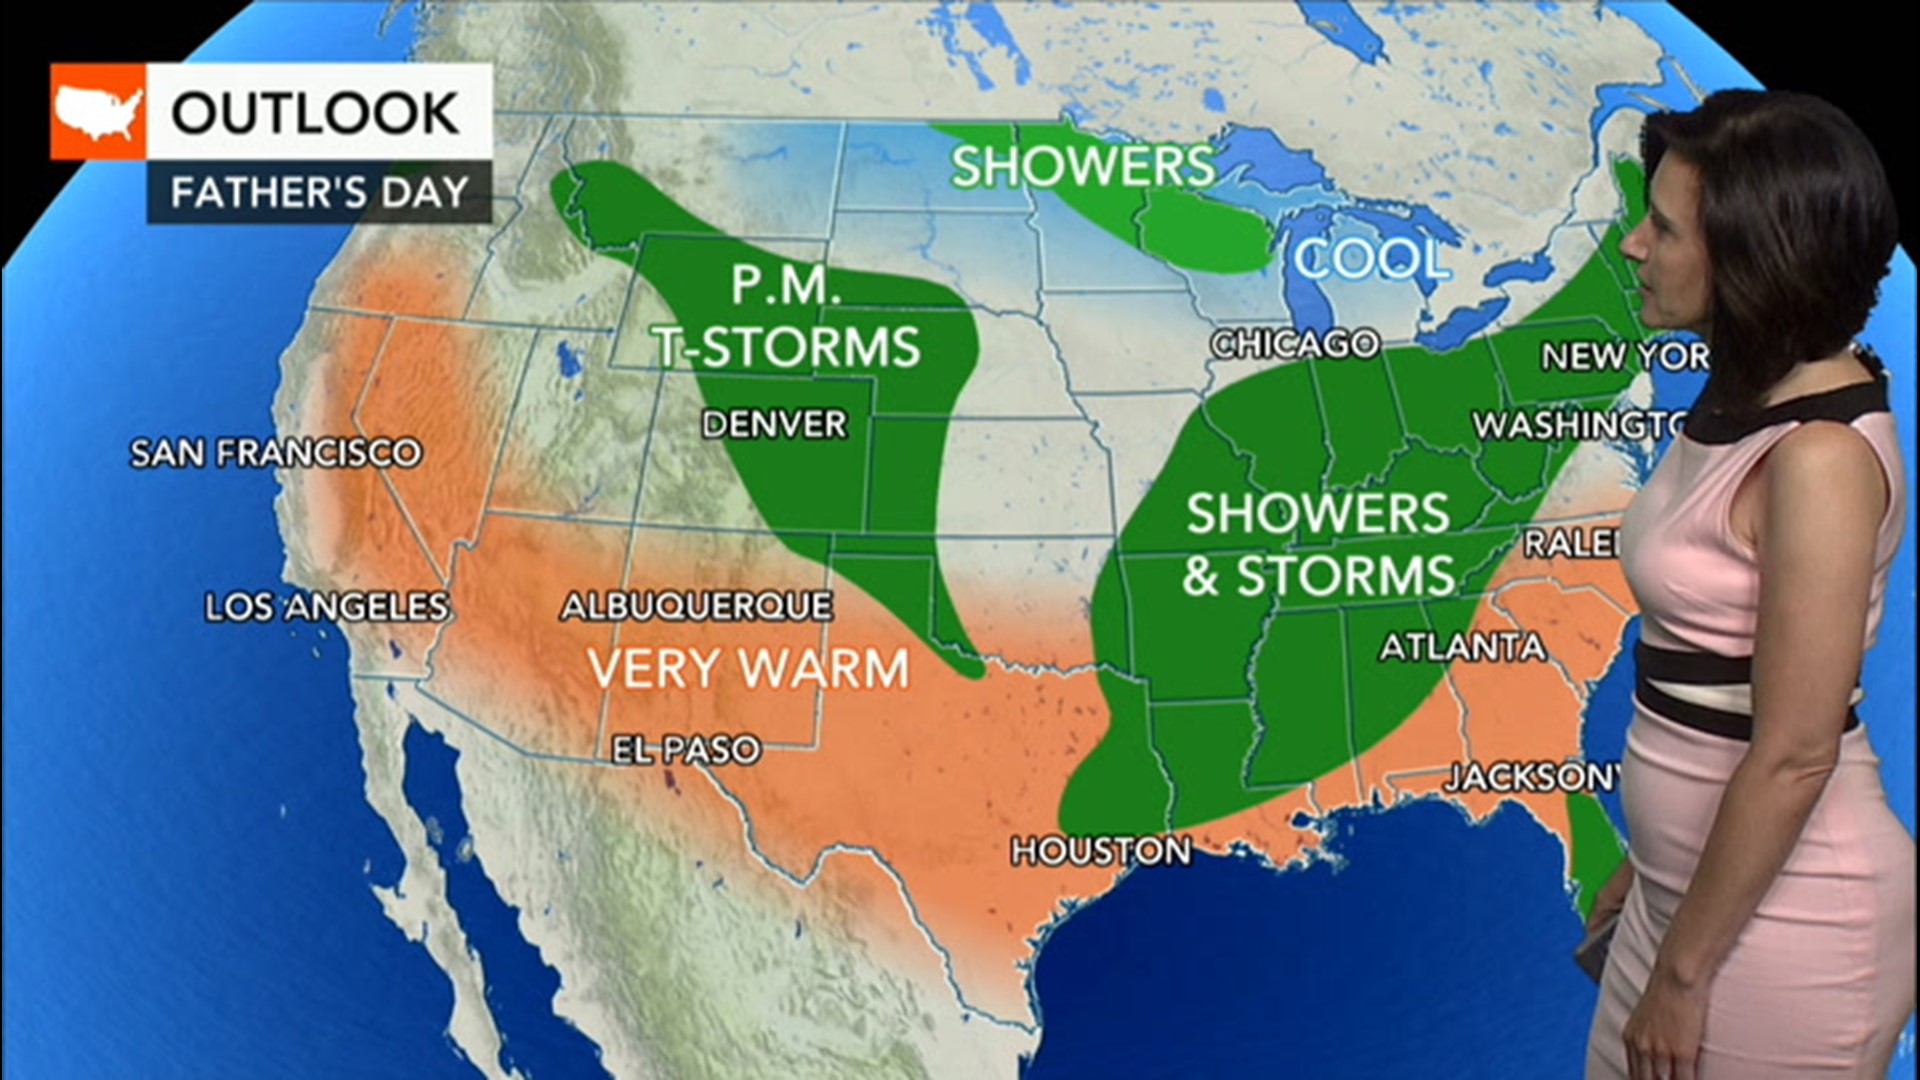 While much of the West should be warm and dry, thunderstorms will target portions of the central and eastern U.S